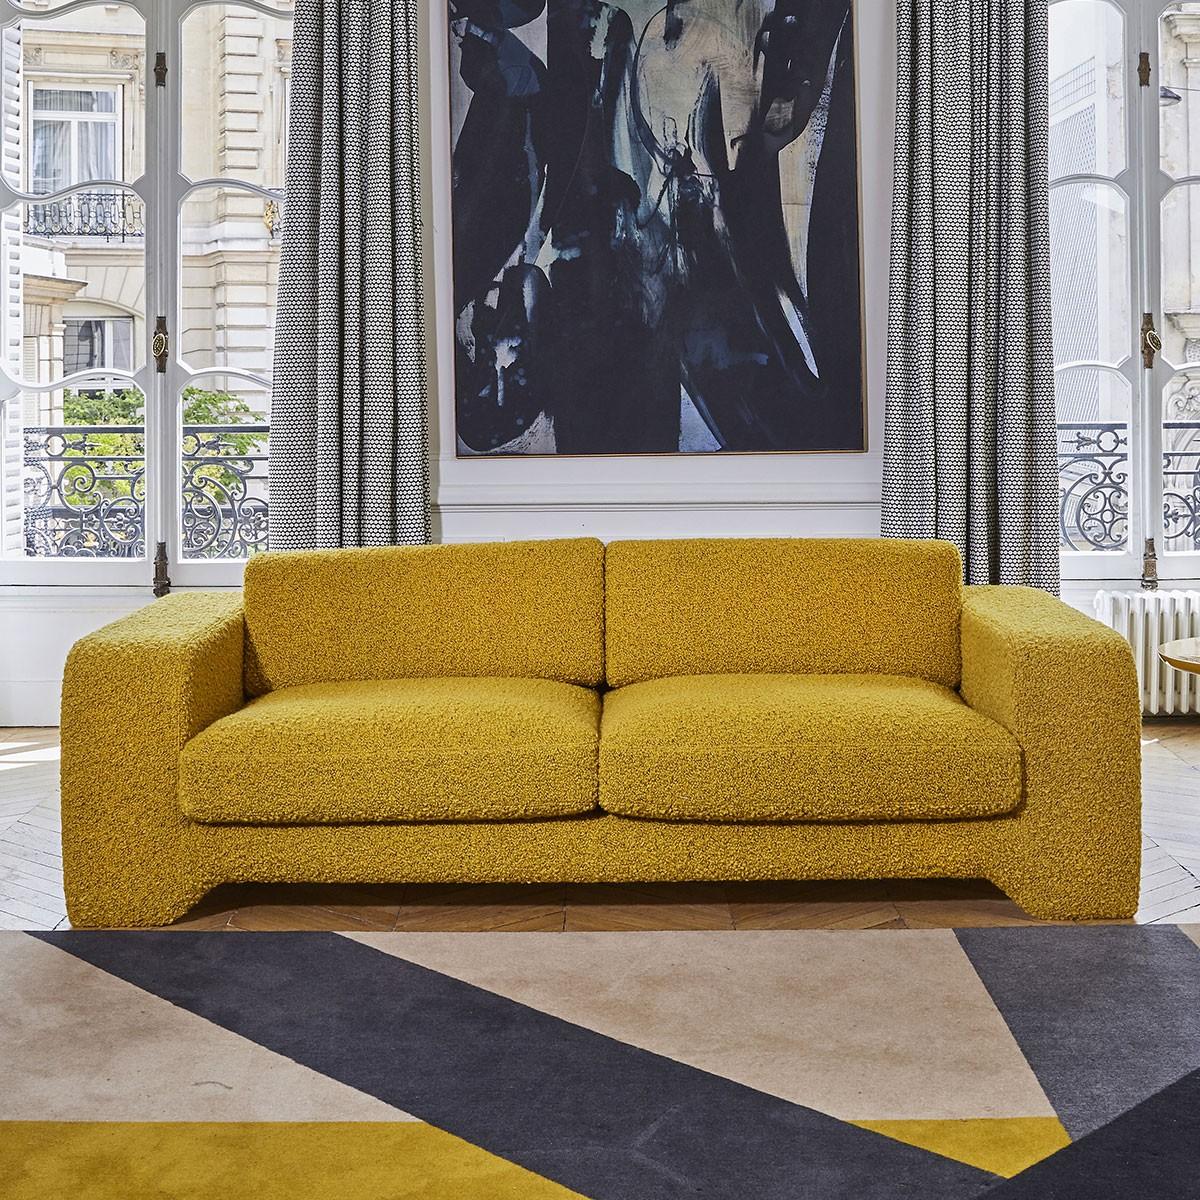 Popus Editions Giovanna 4 seater sofa in Khaki Como Velvet Upholstery

Giovanna is a sofa with a strong profile. A sober, plush line, with this famous detail that changes everything, so as not to forget its strength of character and this charming